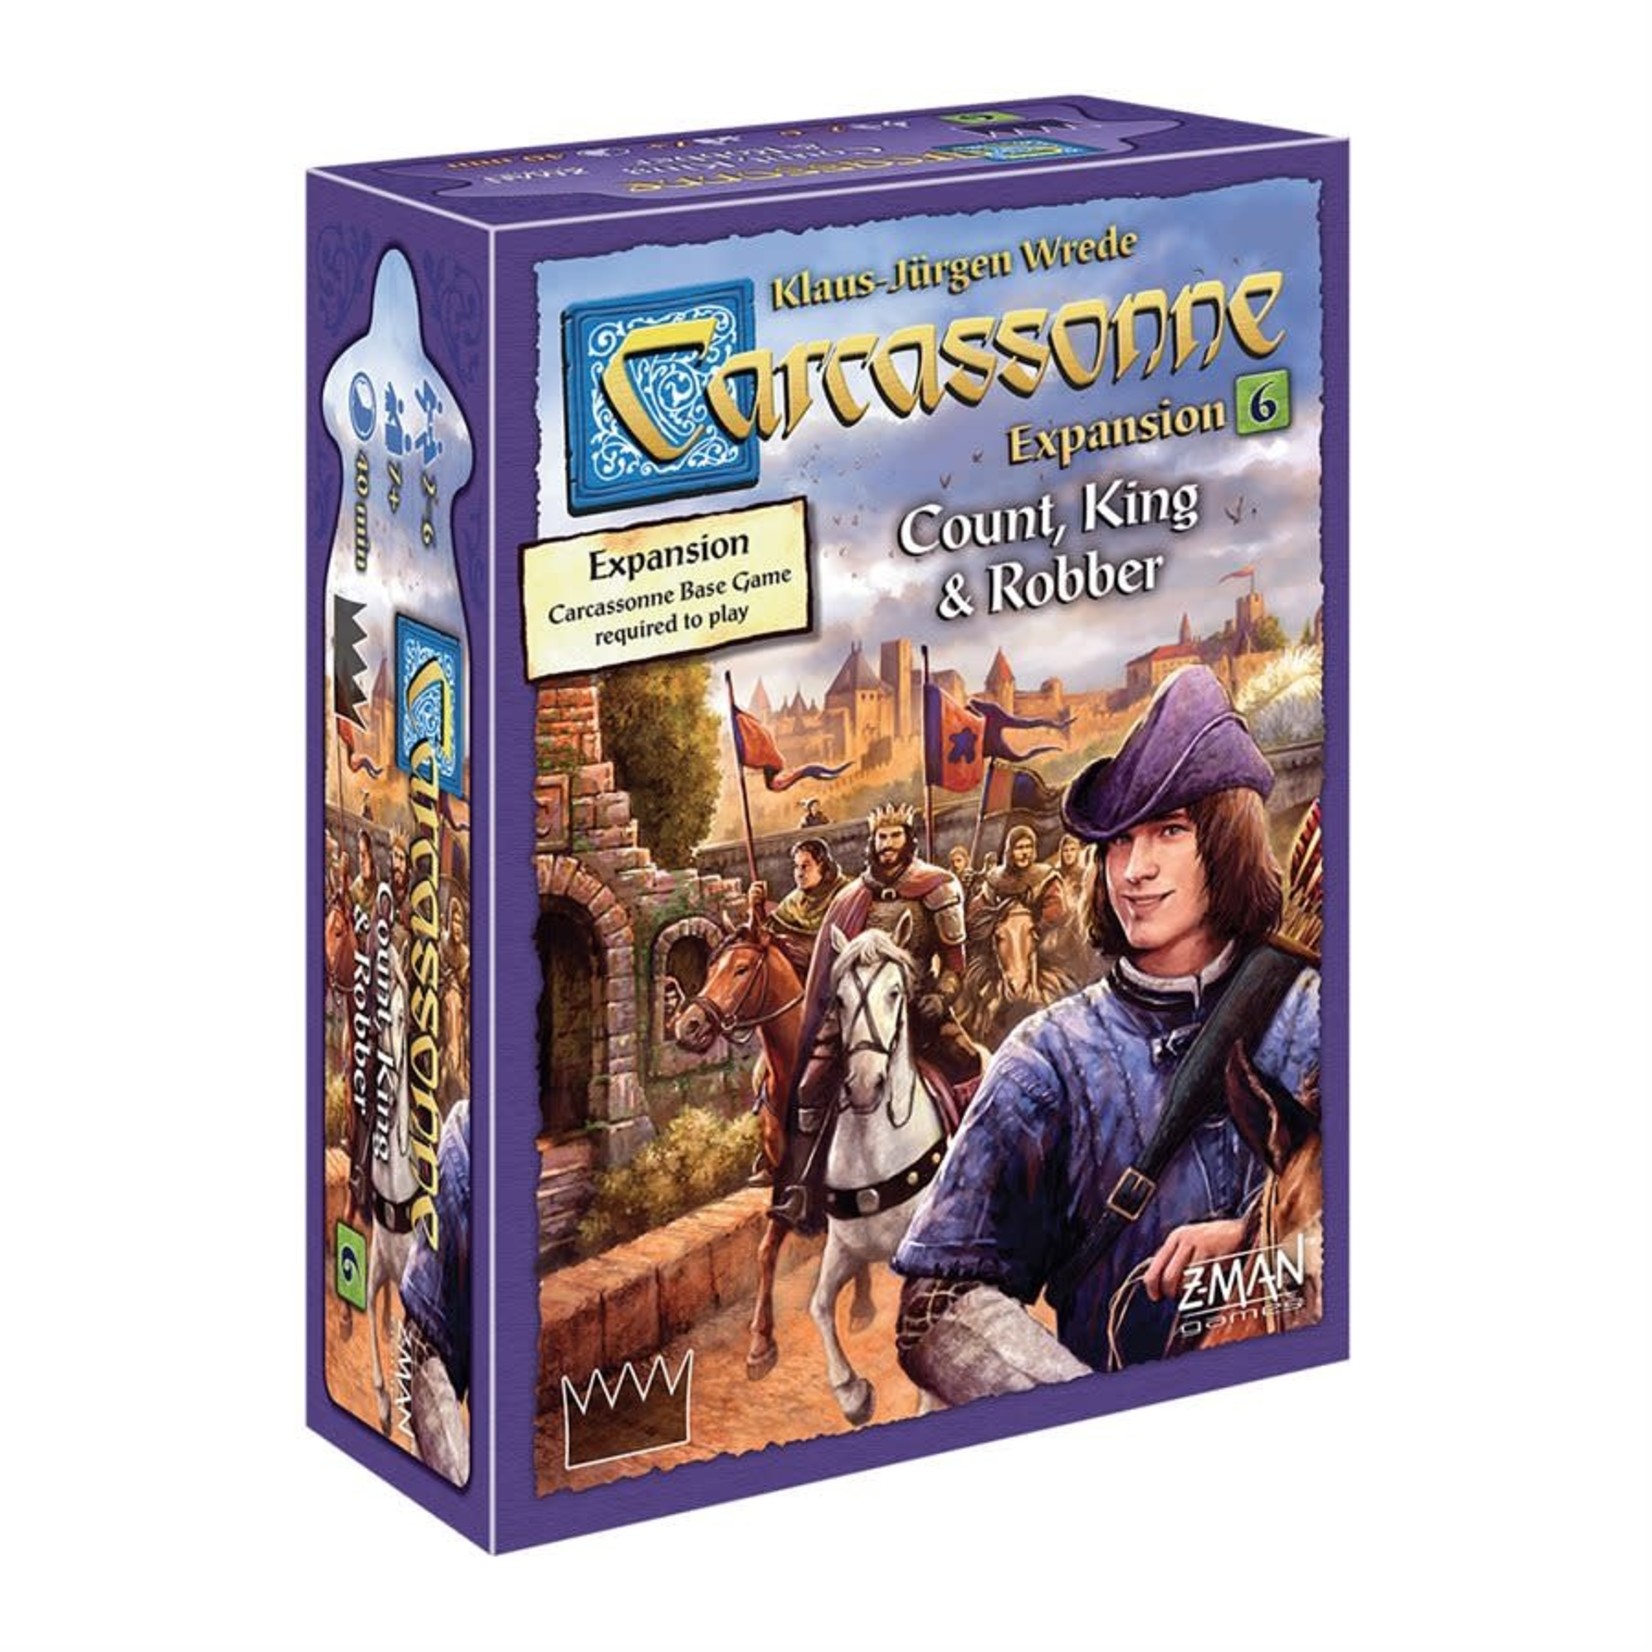 Carcassonne Expansion 6 Count King & Robber Expansion